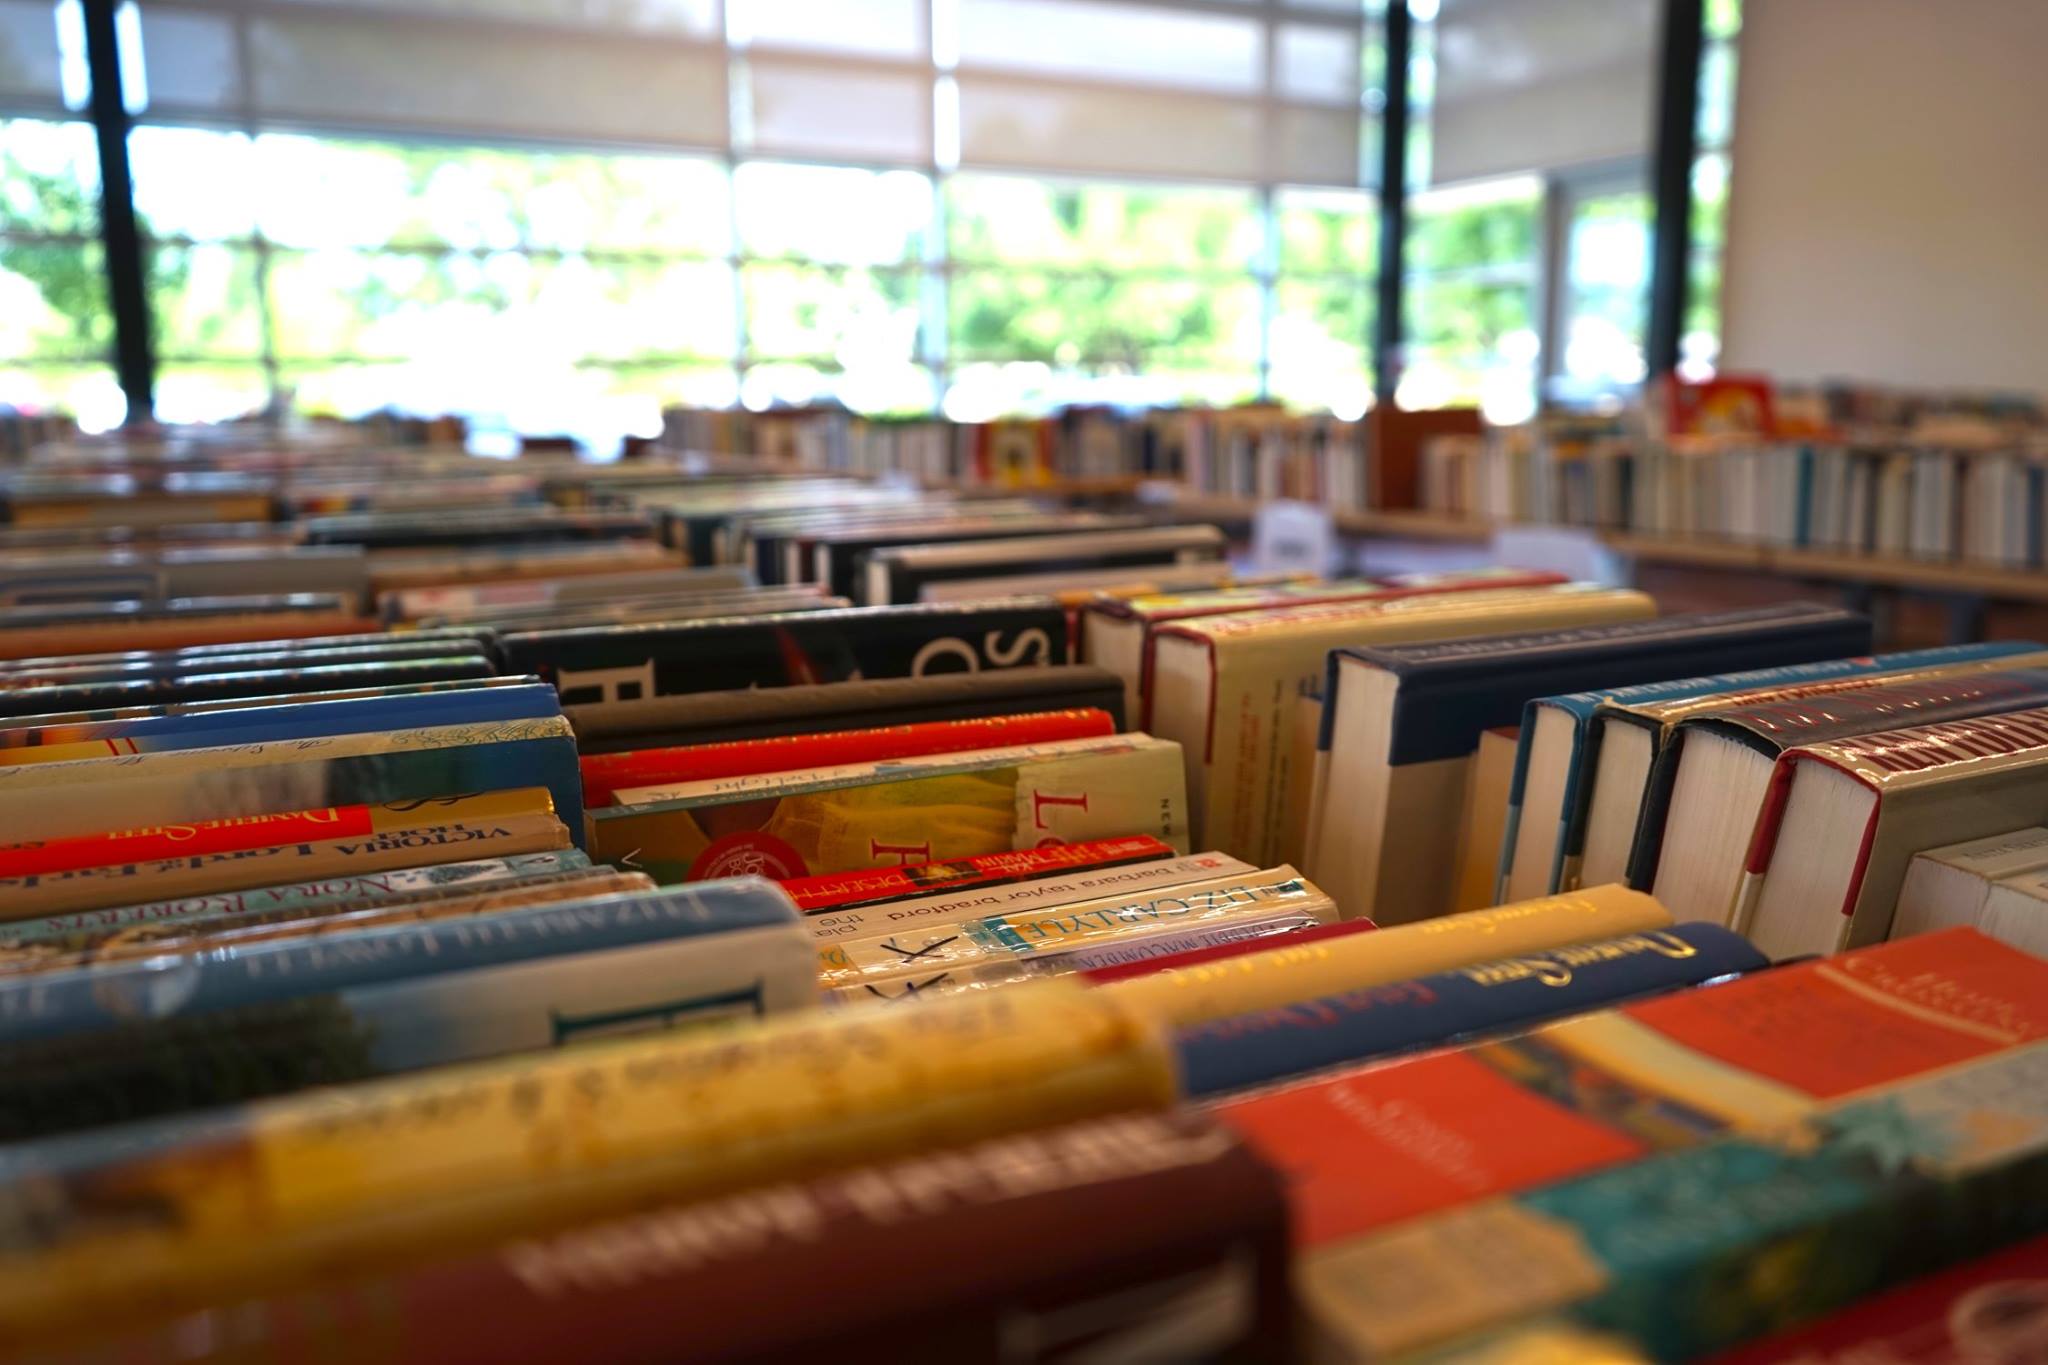 Books lined up on tables for a book sale.